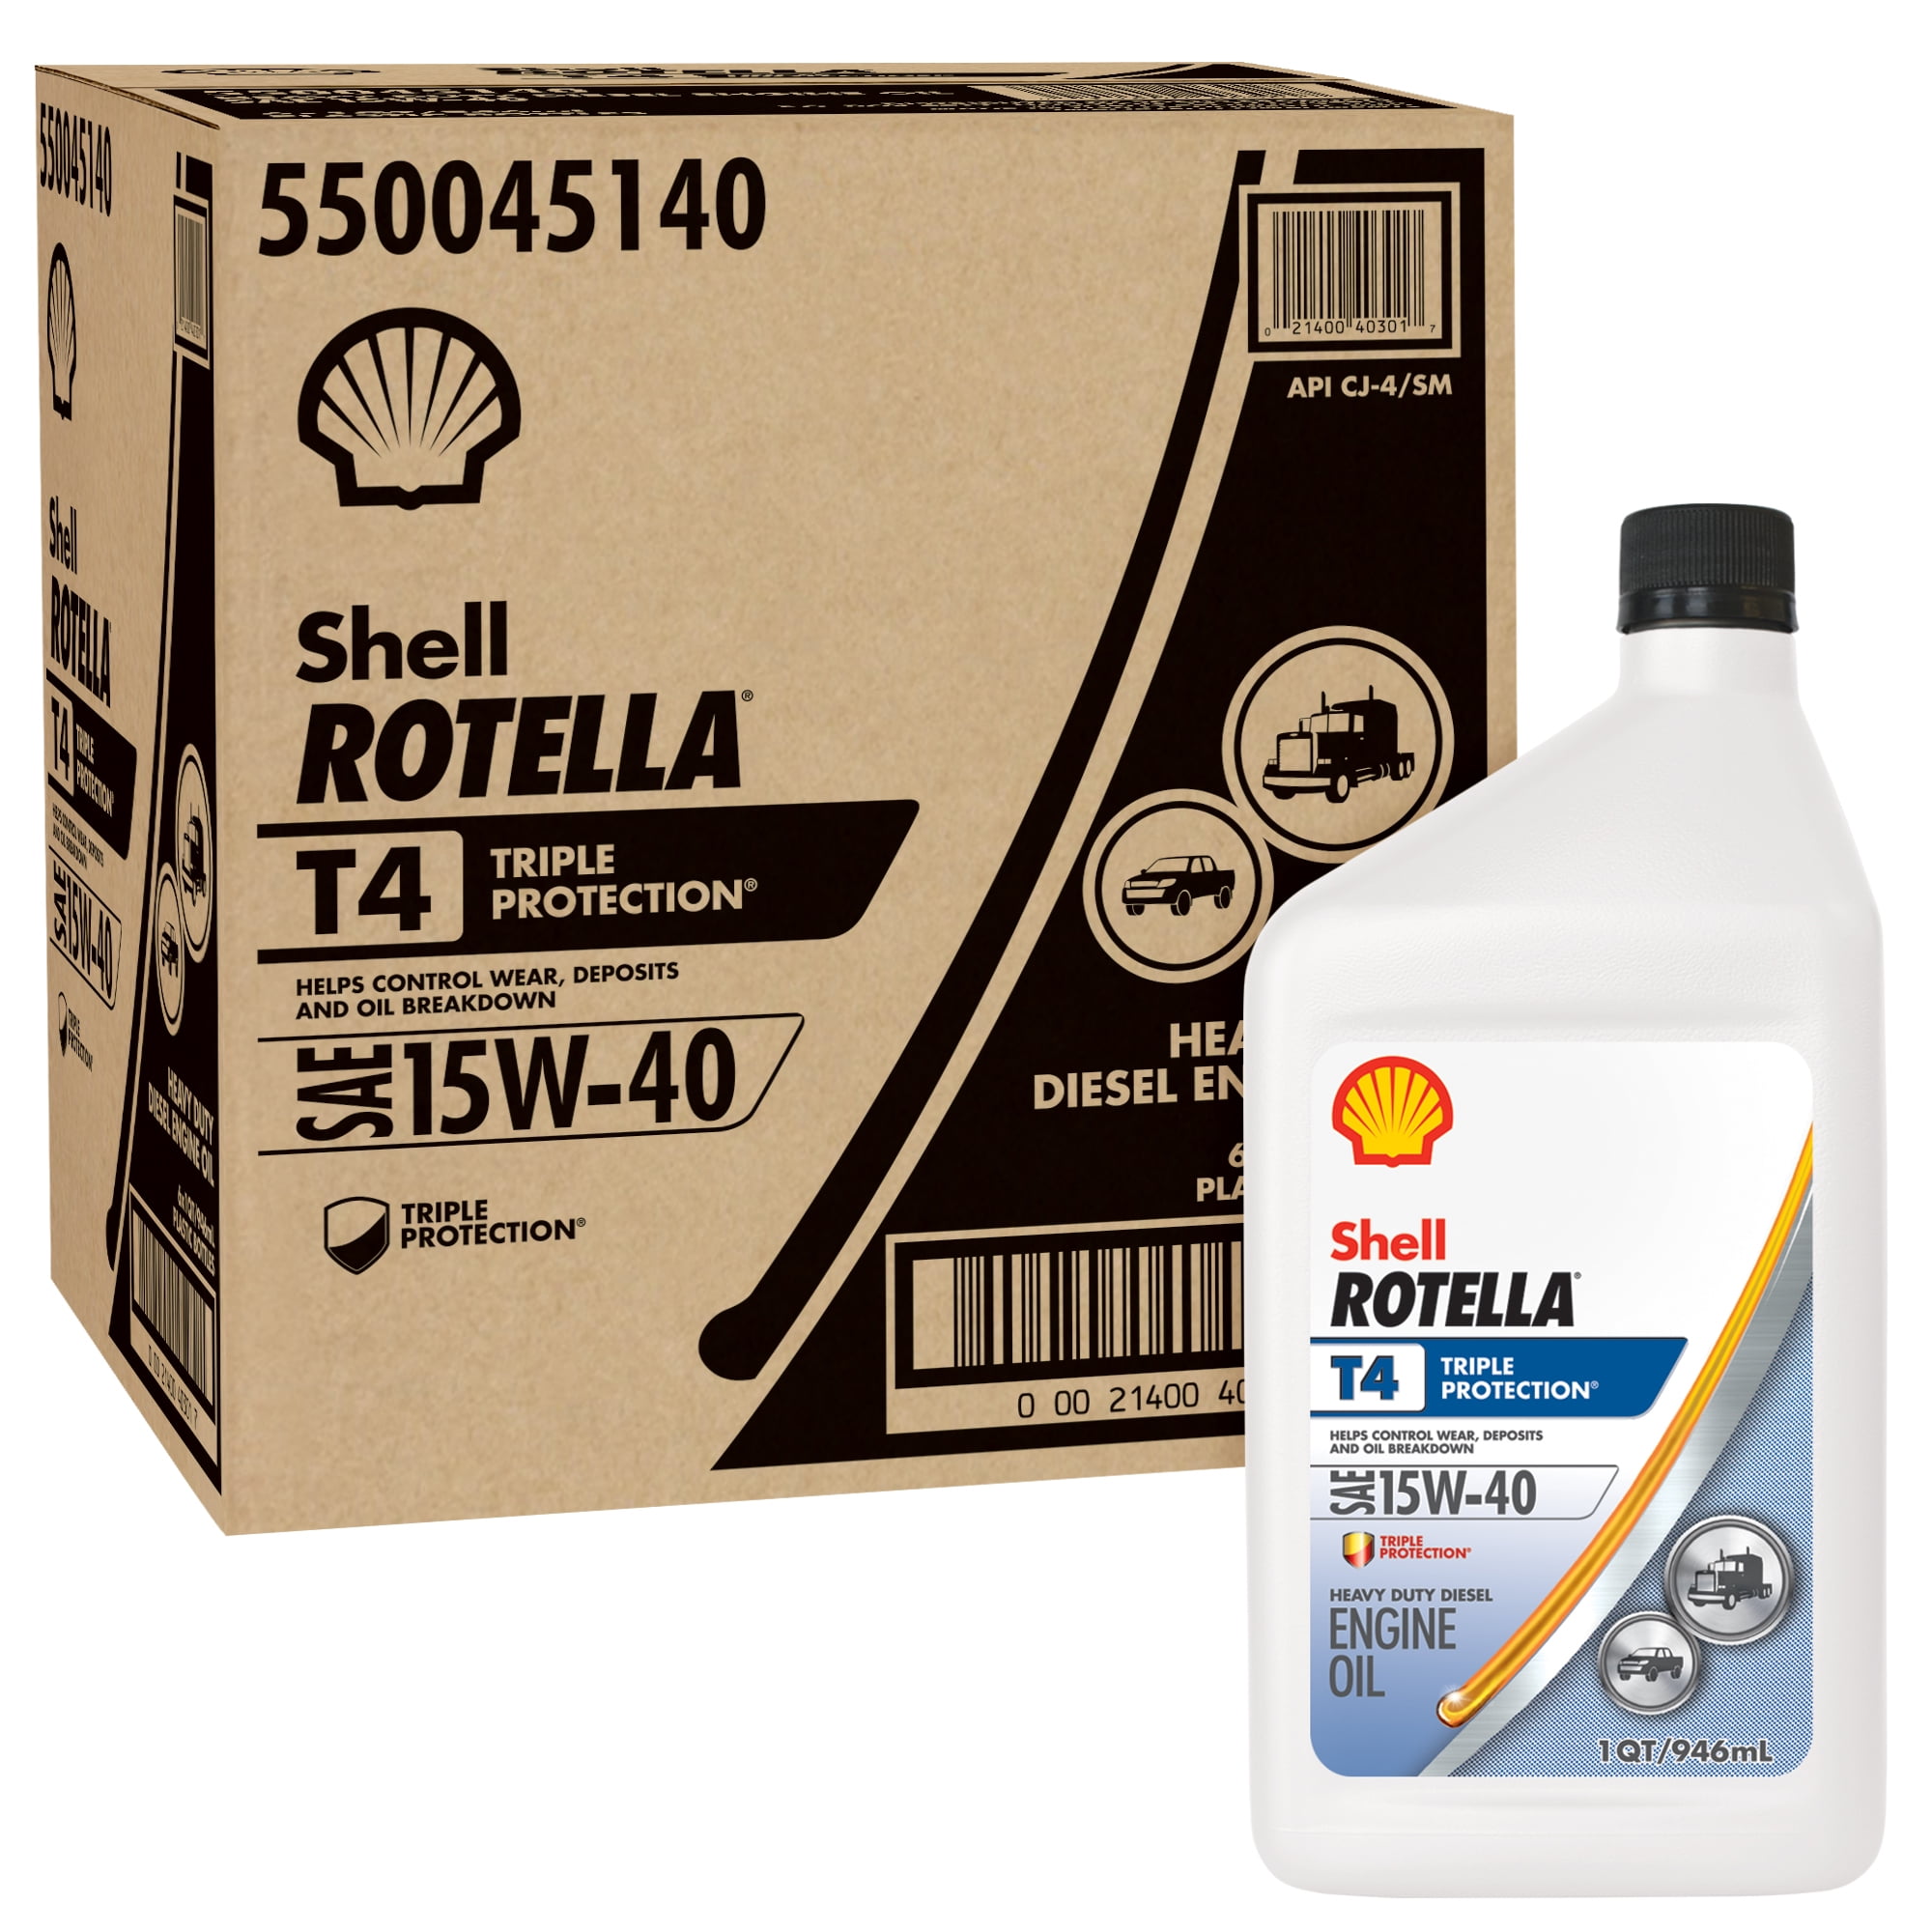 shell-rotella-t4-triple-protection-15w-40-diesel-engine-oil-1-qt